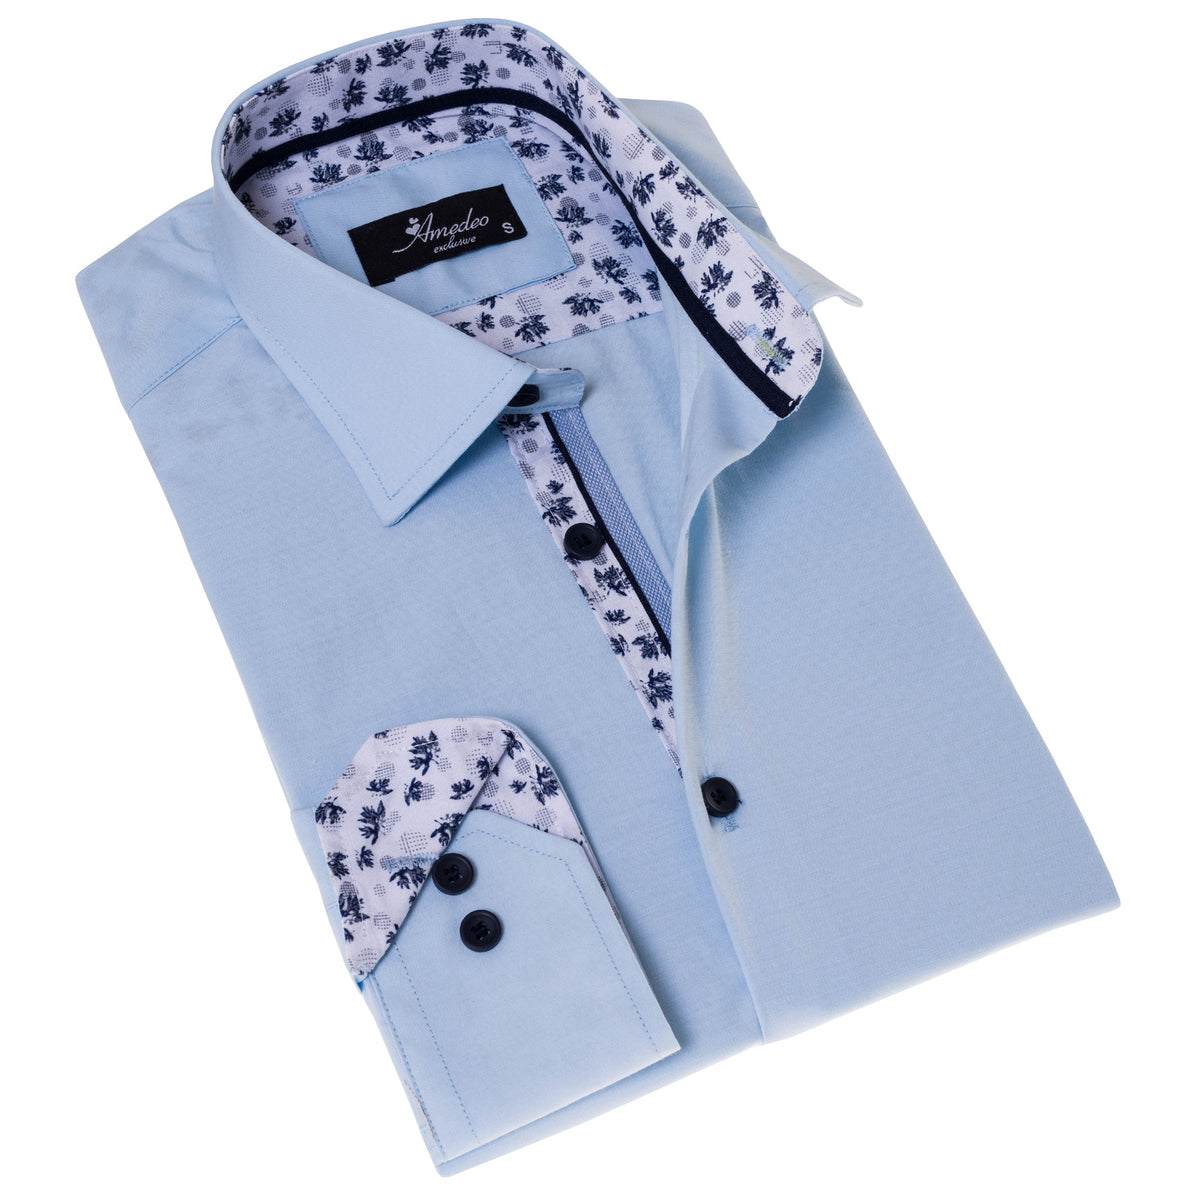 Blue inside Printed Men's Slim Fit Designer French Cuff Shirt - Tailored Cotton Shirts for Work and Casual Wear